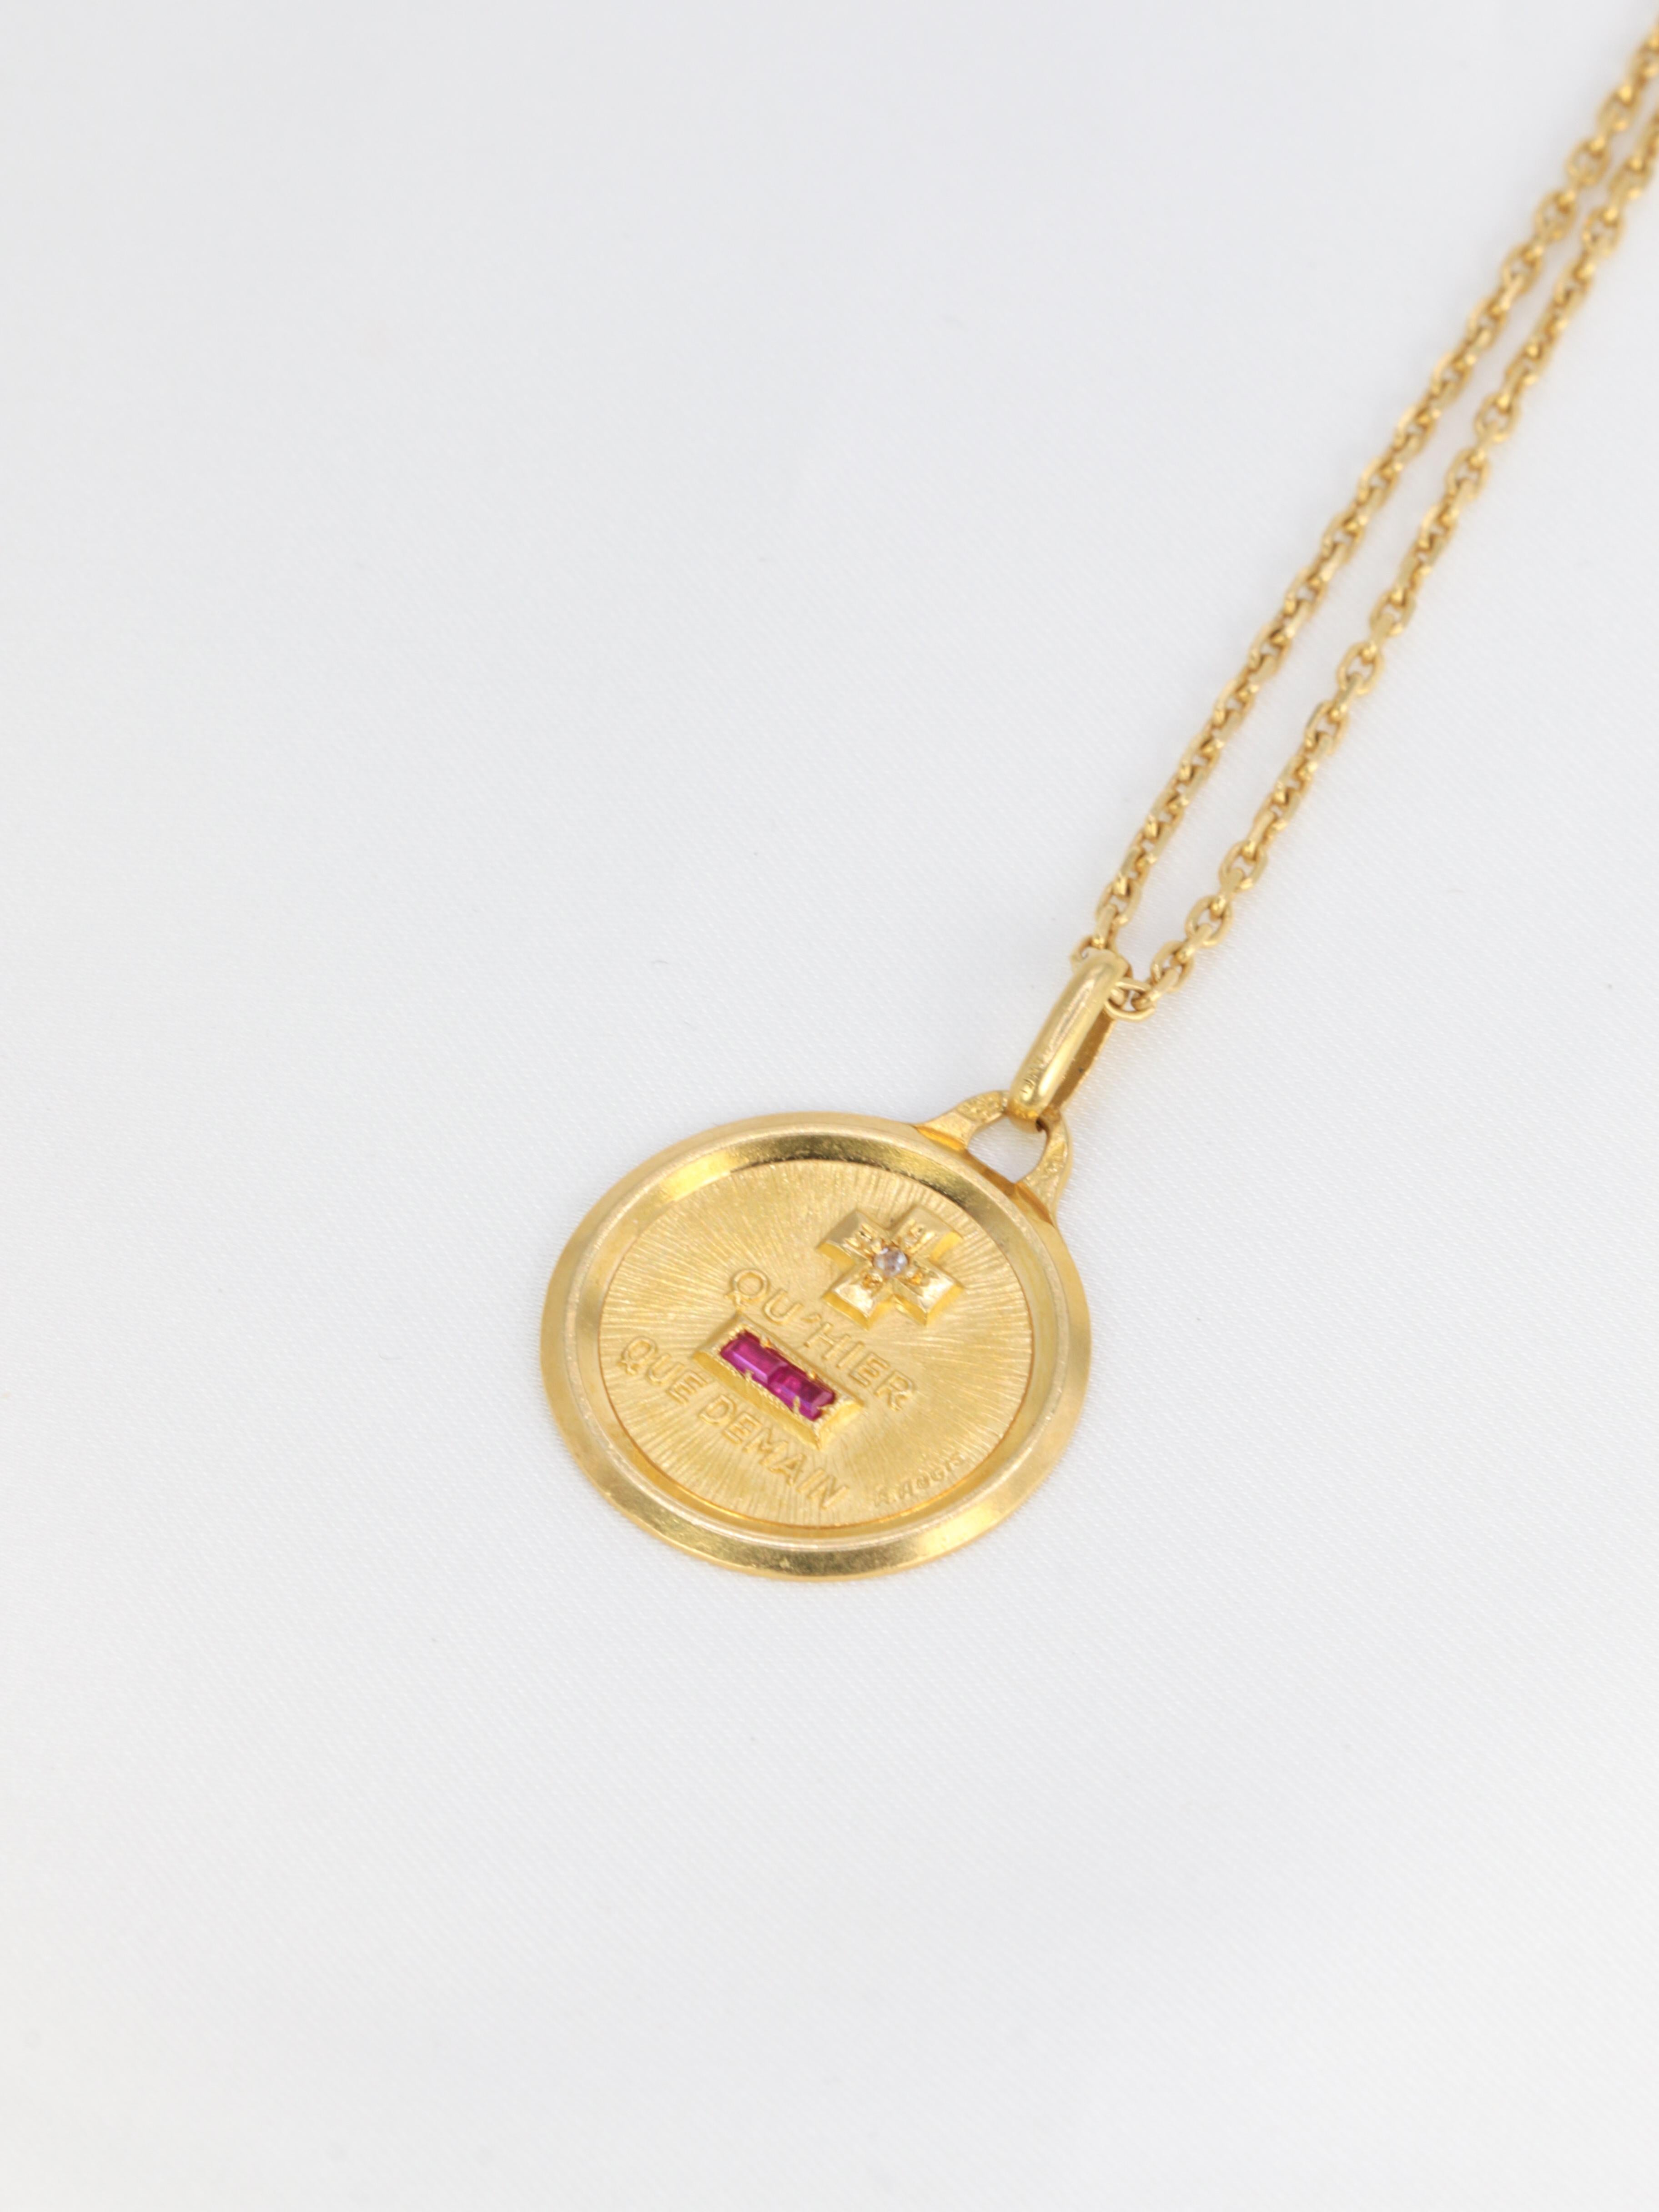 18Kt (750°/°°) gold Augis love medal set with baguette-cut synthetic rubies and a small rose-cut diamond.
The famous sentence Plus qu'hier Moins que demain, inspired by two verses by Rosemonde Gérard Rostand, is written on the medal.
French work